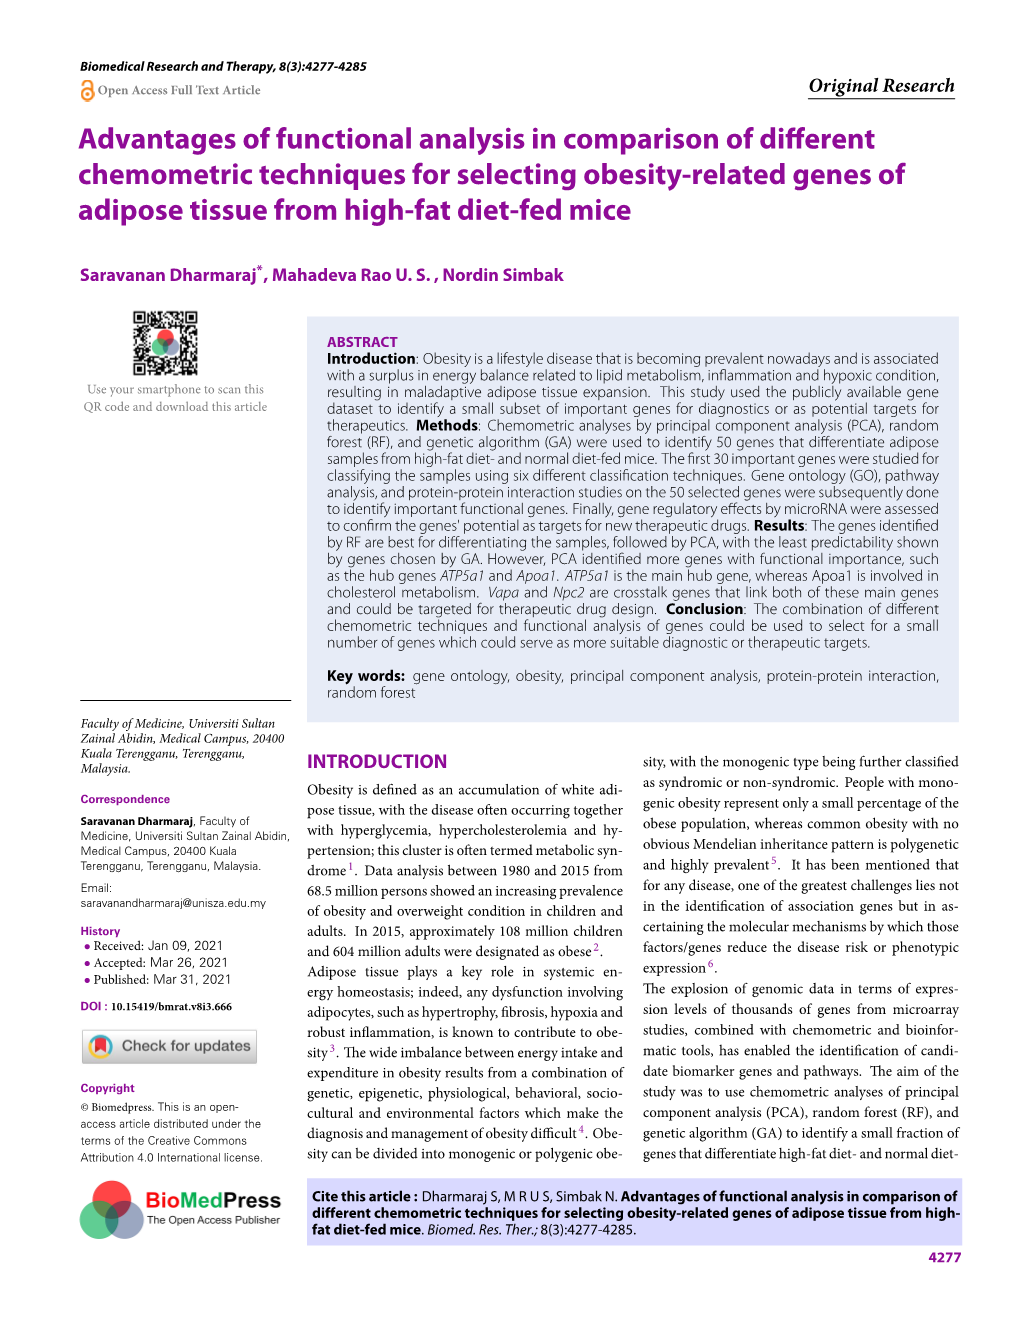 Advantages of Functional Analysis in Comparison of Different Chemometric Techniques for Selecting Obesity-Related Genes of Adipose Tissue from High-Fat Diet-Fed Mice